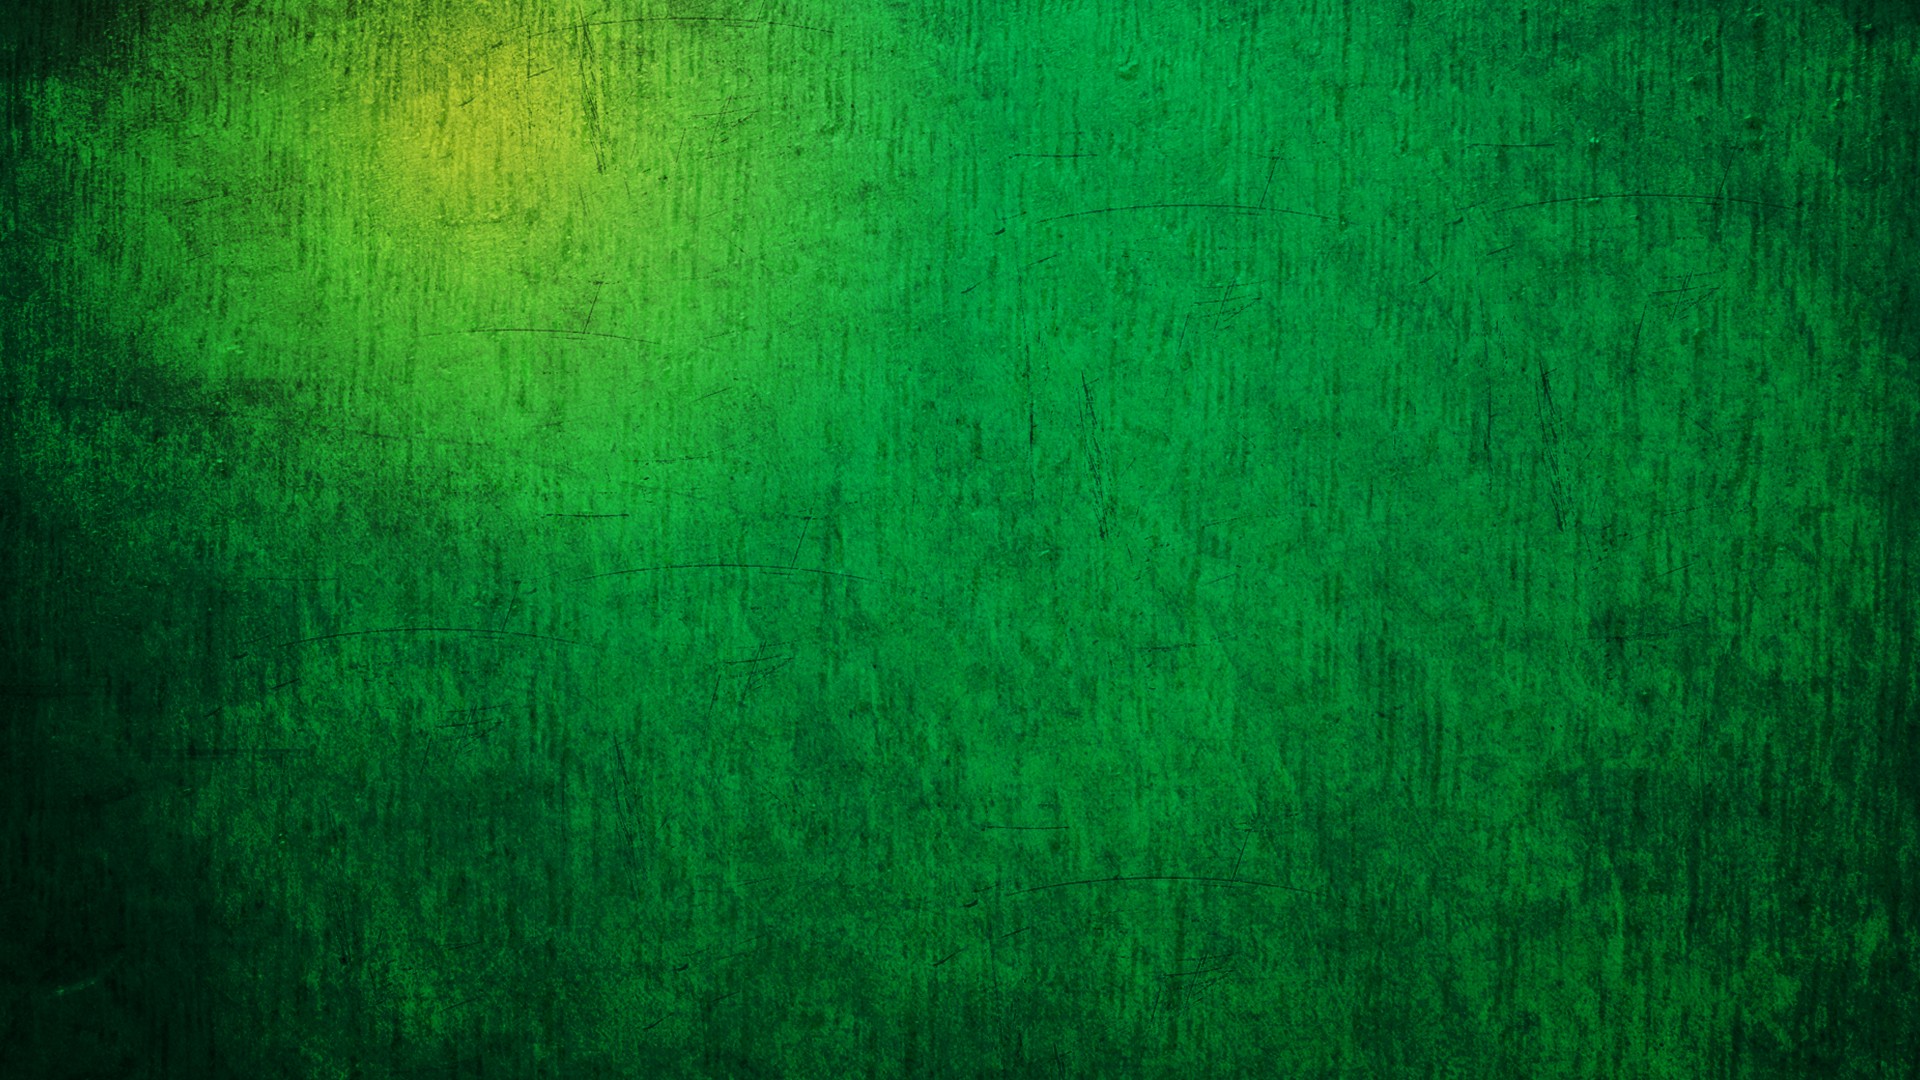 Green Wallpaper For Desktop with image resolution 1920x1080 pixel. You can use this wallpaper as background for your desktop Computer Screensavers, Android or iPhone smartphones